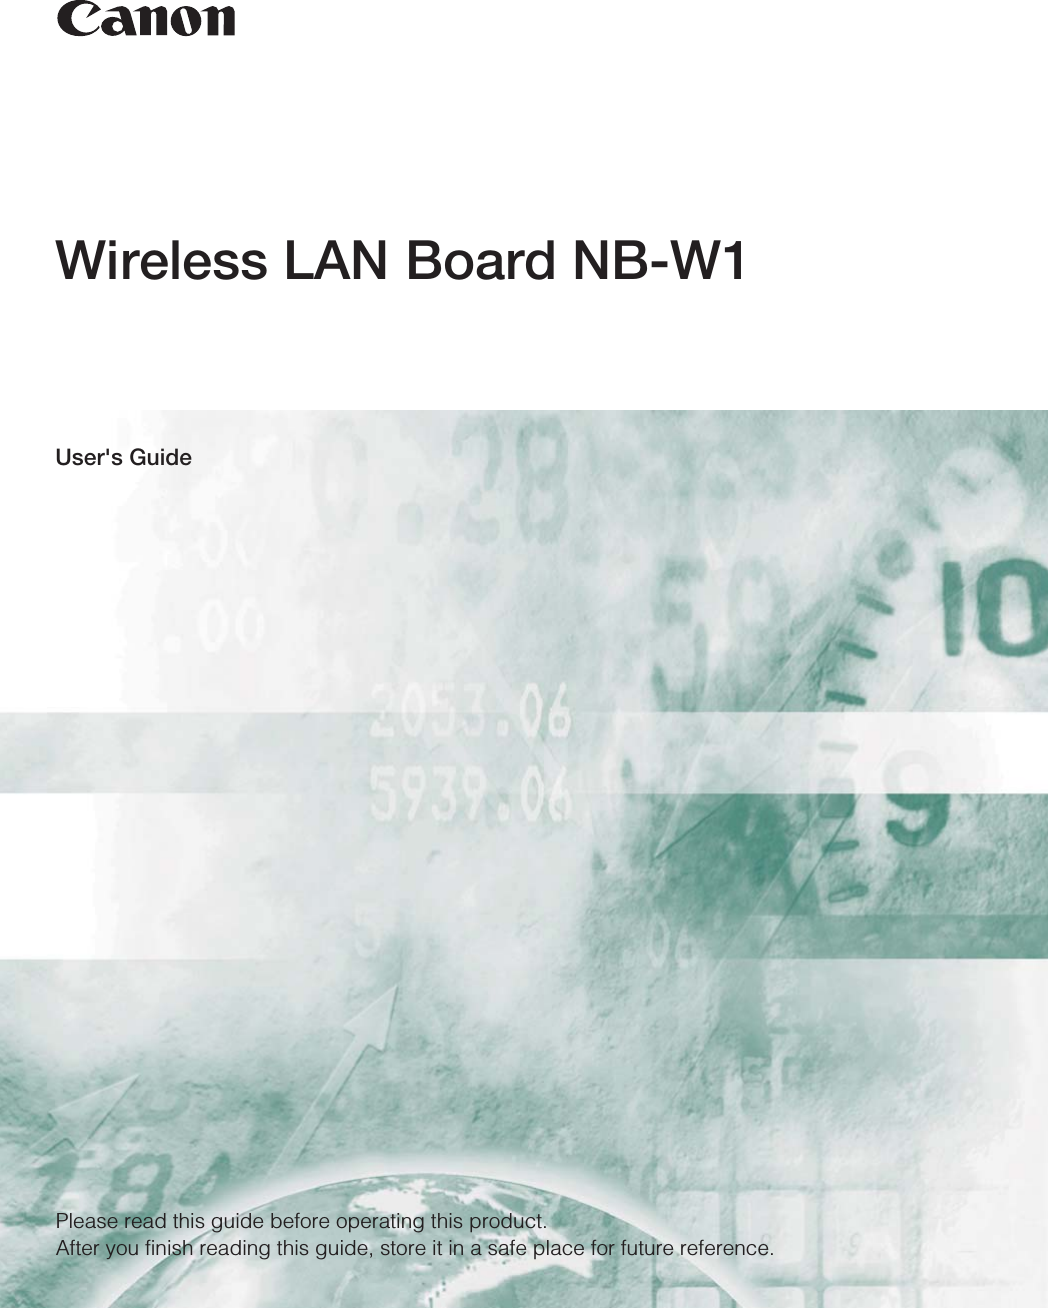 User&apos;s GuideWireless LAN Board NB-W1Please read this guide before operating this product.After you finish reading this guide, store it in a safe place for future reference. 